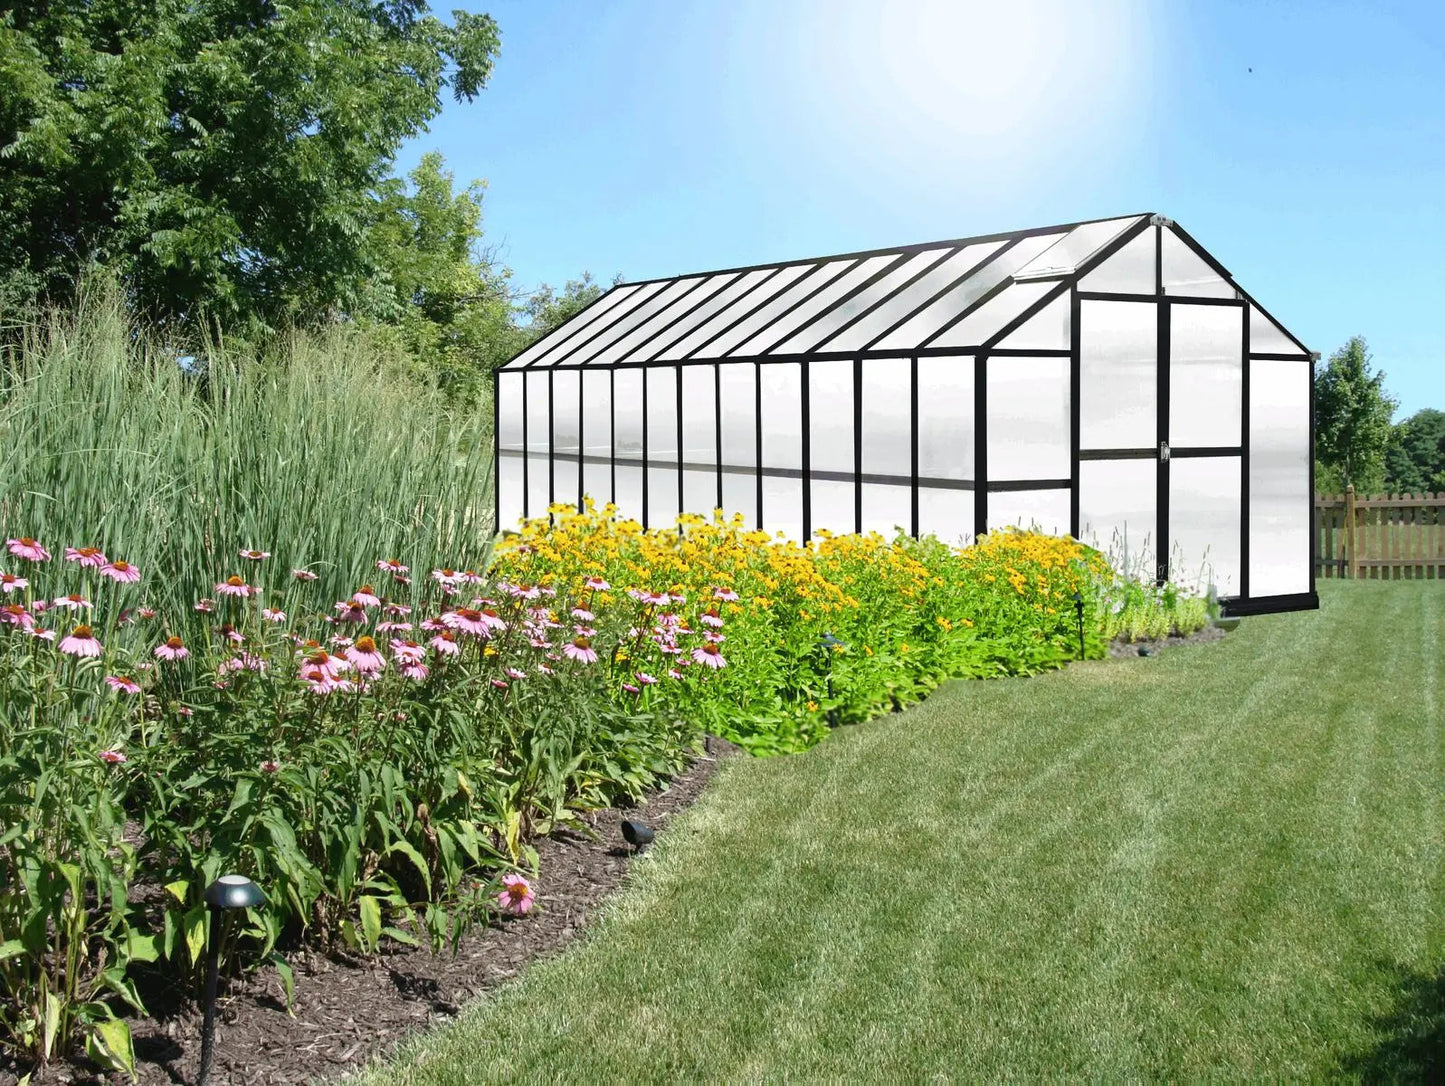  Riverstone MONT Growers Edition Greenhouse Kit (Black Finish) | Greenhouses | Garden Forests